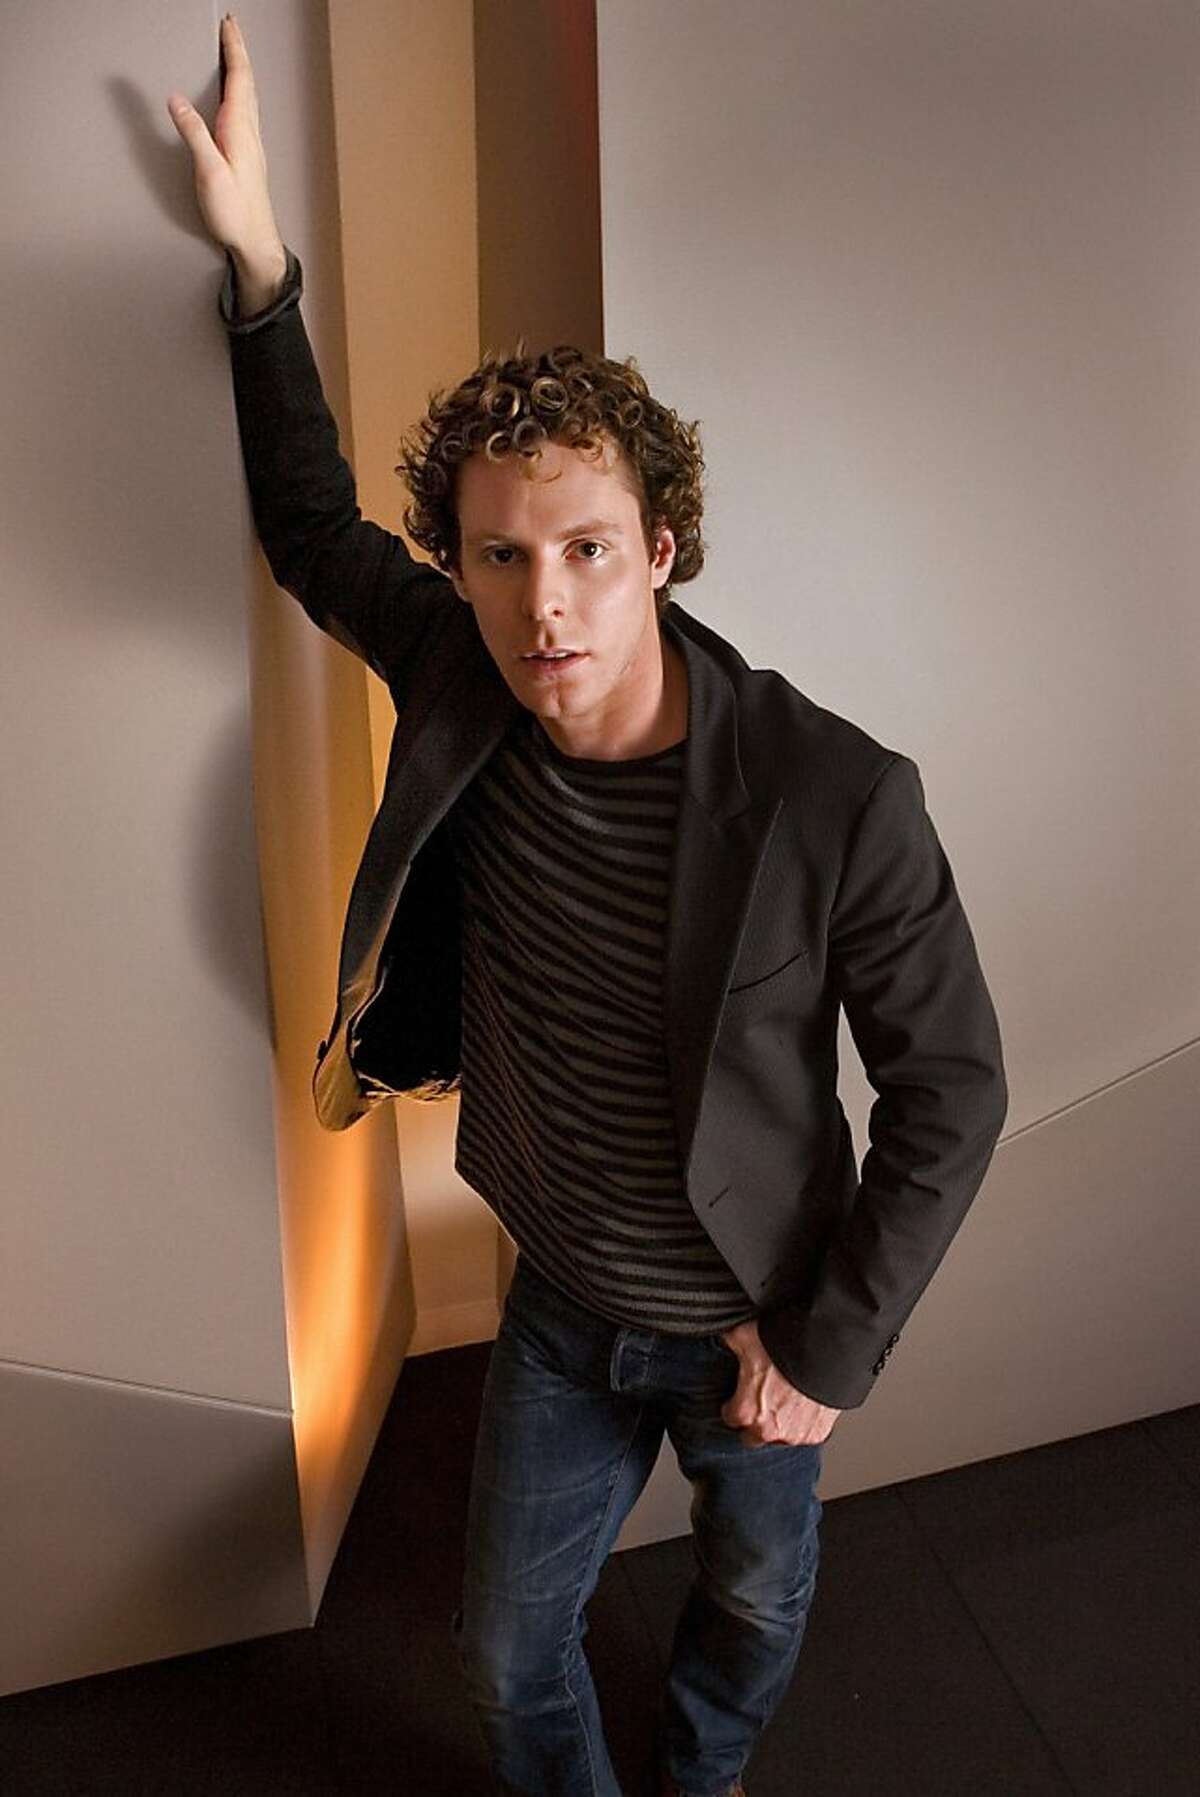 Sean Parker who helped launch Napster, in the offices of Clarium Capital Management LLC at the Lucas complex in the Presidio in San Francisco, CA, on Wednesday, November, 29, 2006.